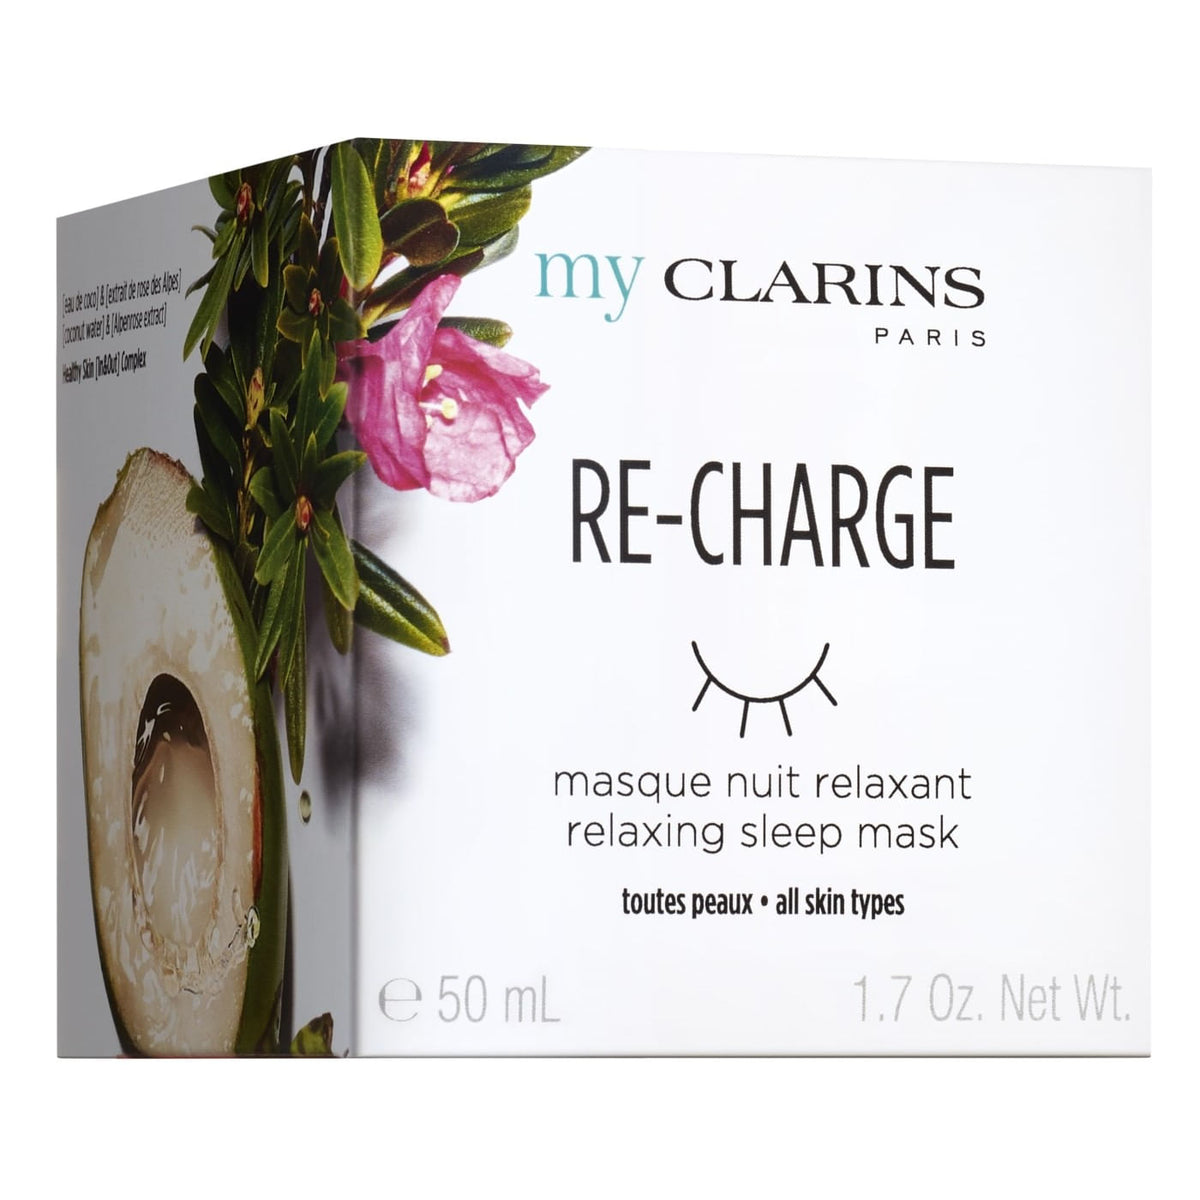 My Clarins Re-Charge Relaxing Night Mask